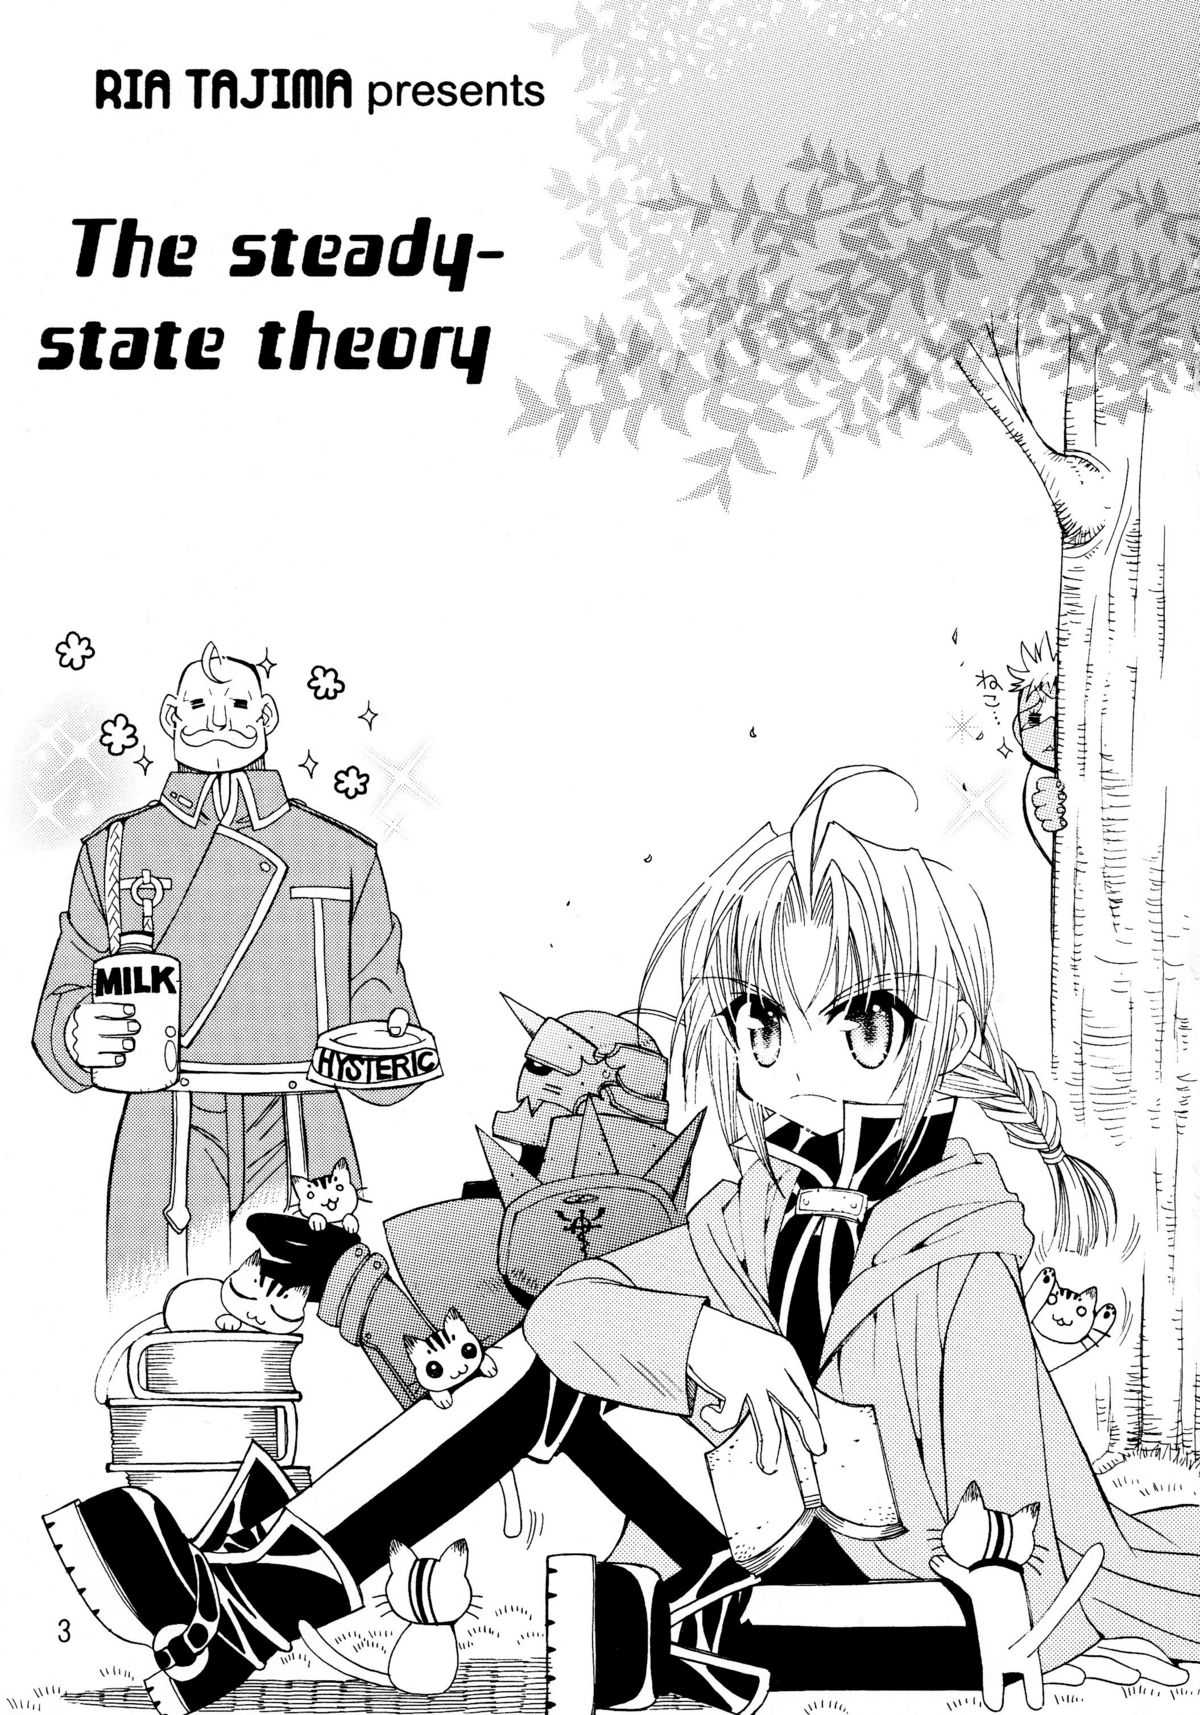 (C66) [SUBSONIC FACTOR (Ria Tajima)] The steady-state theory (Fullmetal Alchemist) (C66) [SUBSONIC FACTOR (立嶋りあ)] The steady-state theory (鋼の錬金術師)